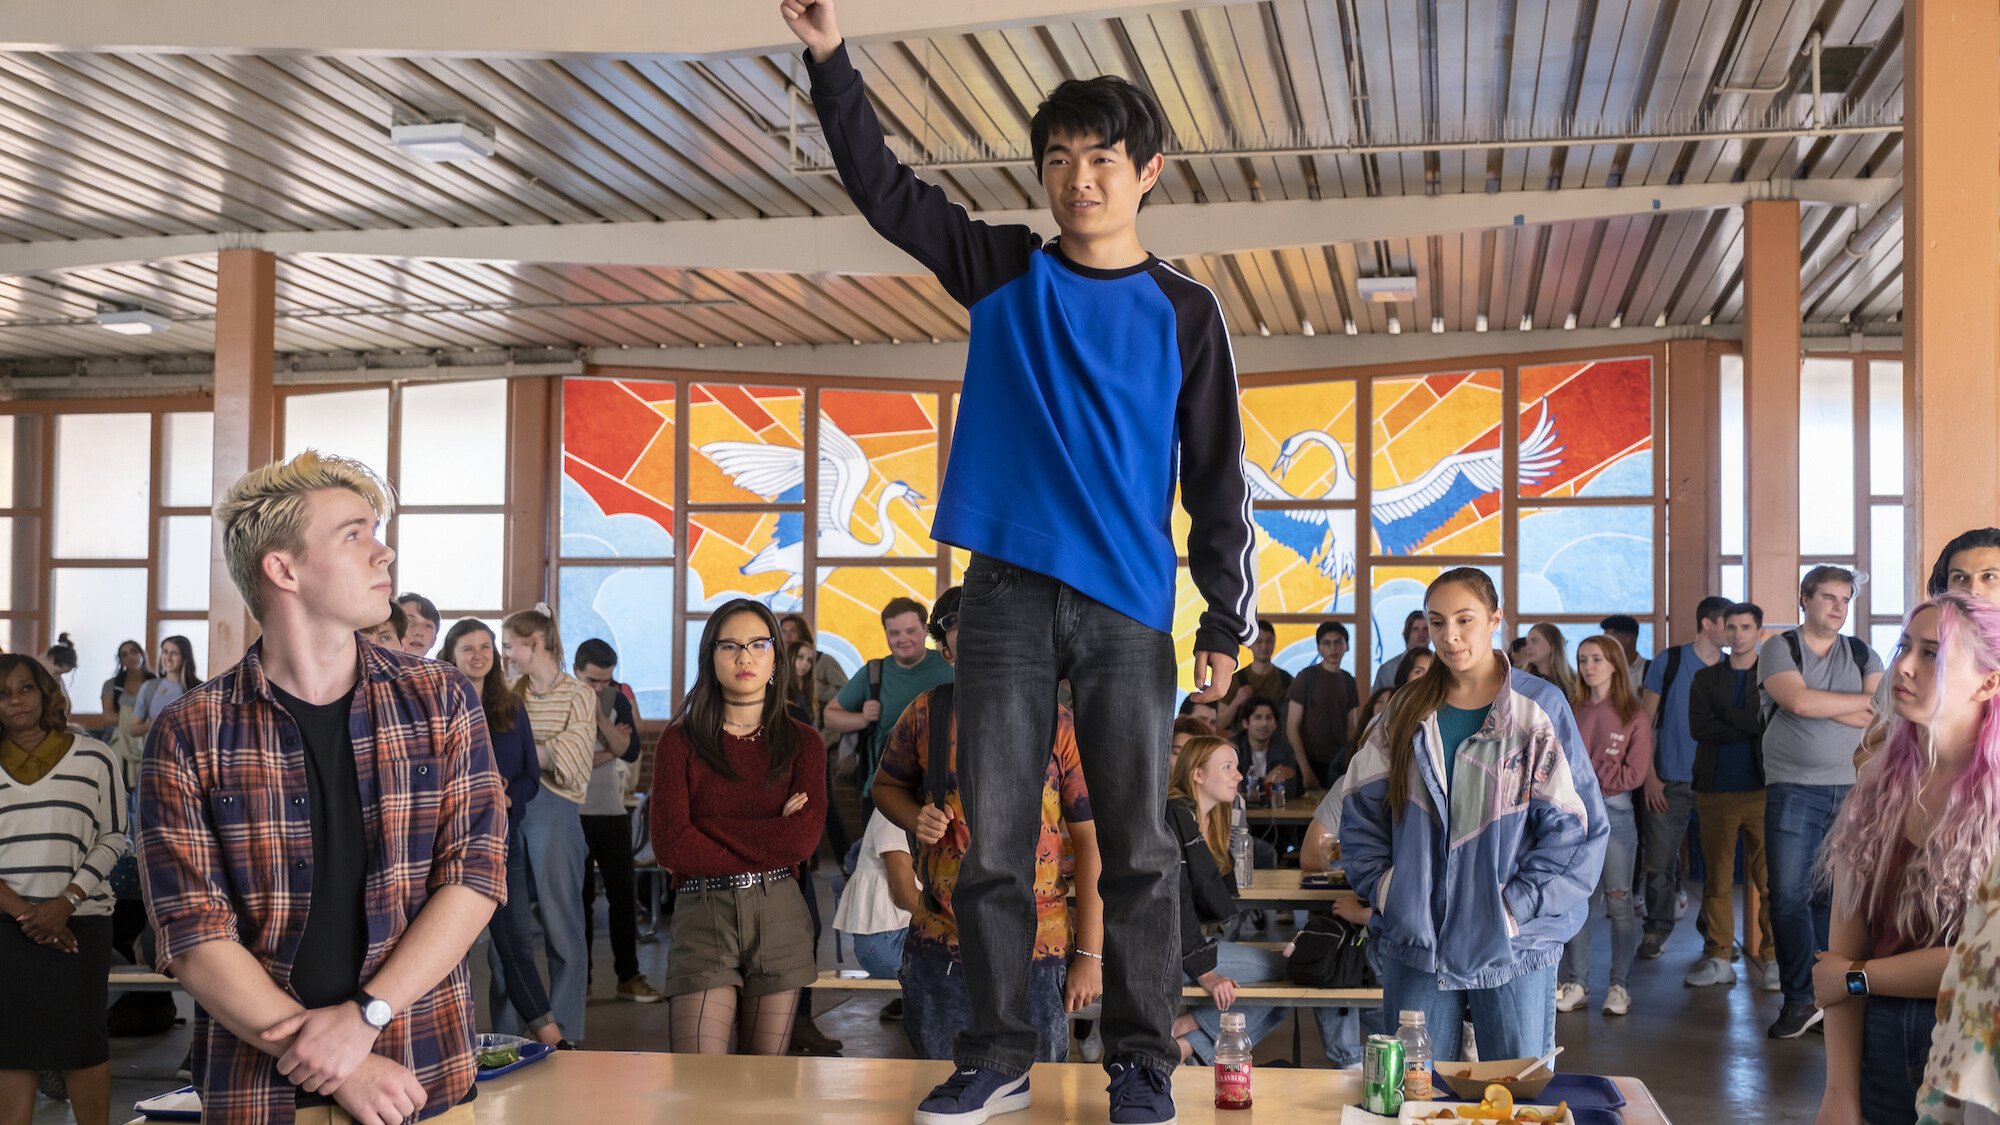 A teenager wearing a blue shirt stands atop a table in a high school cafeteria.